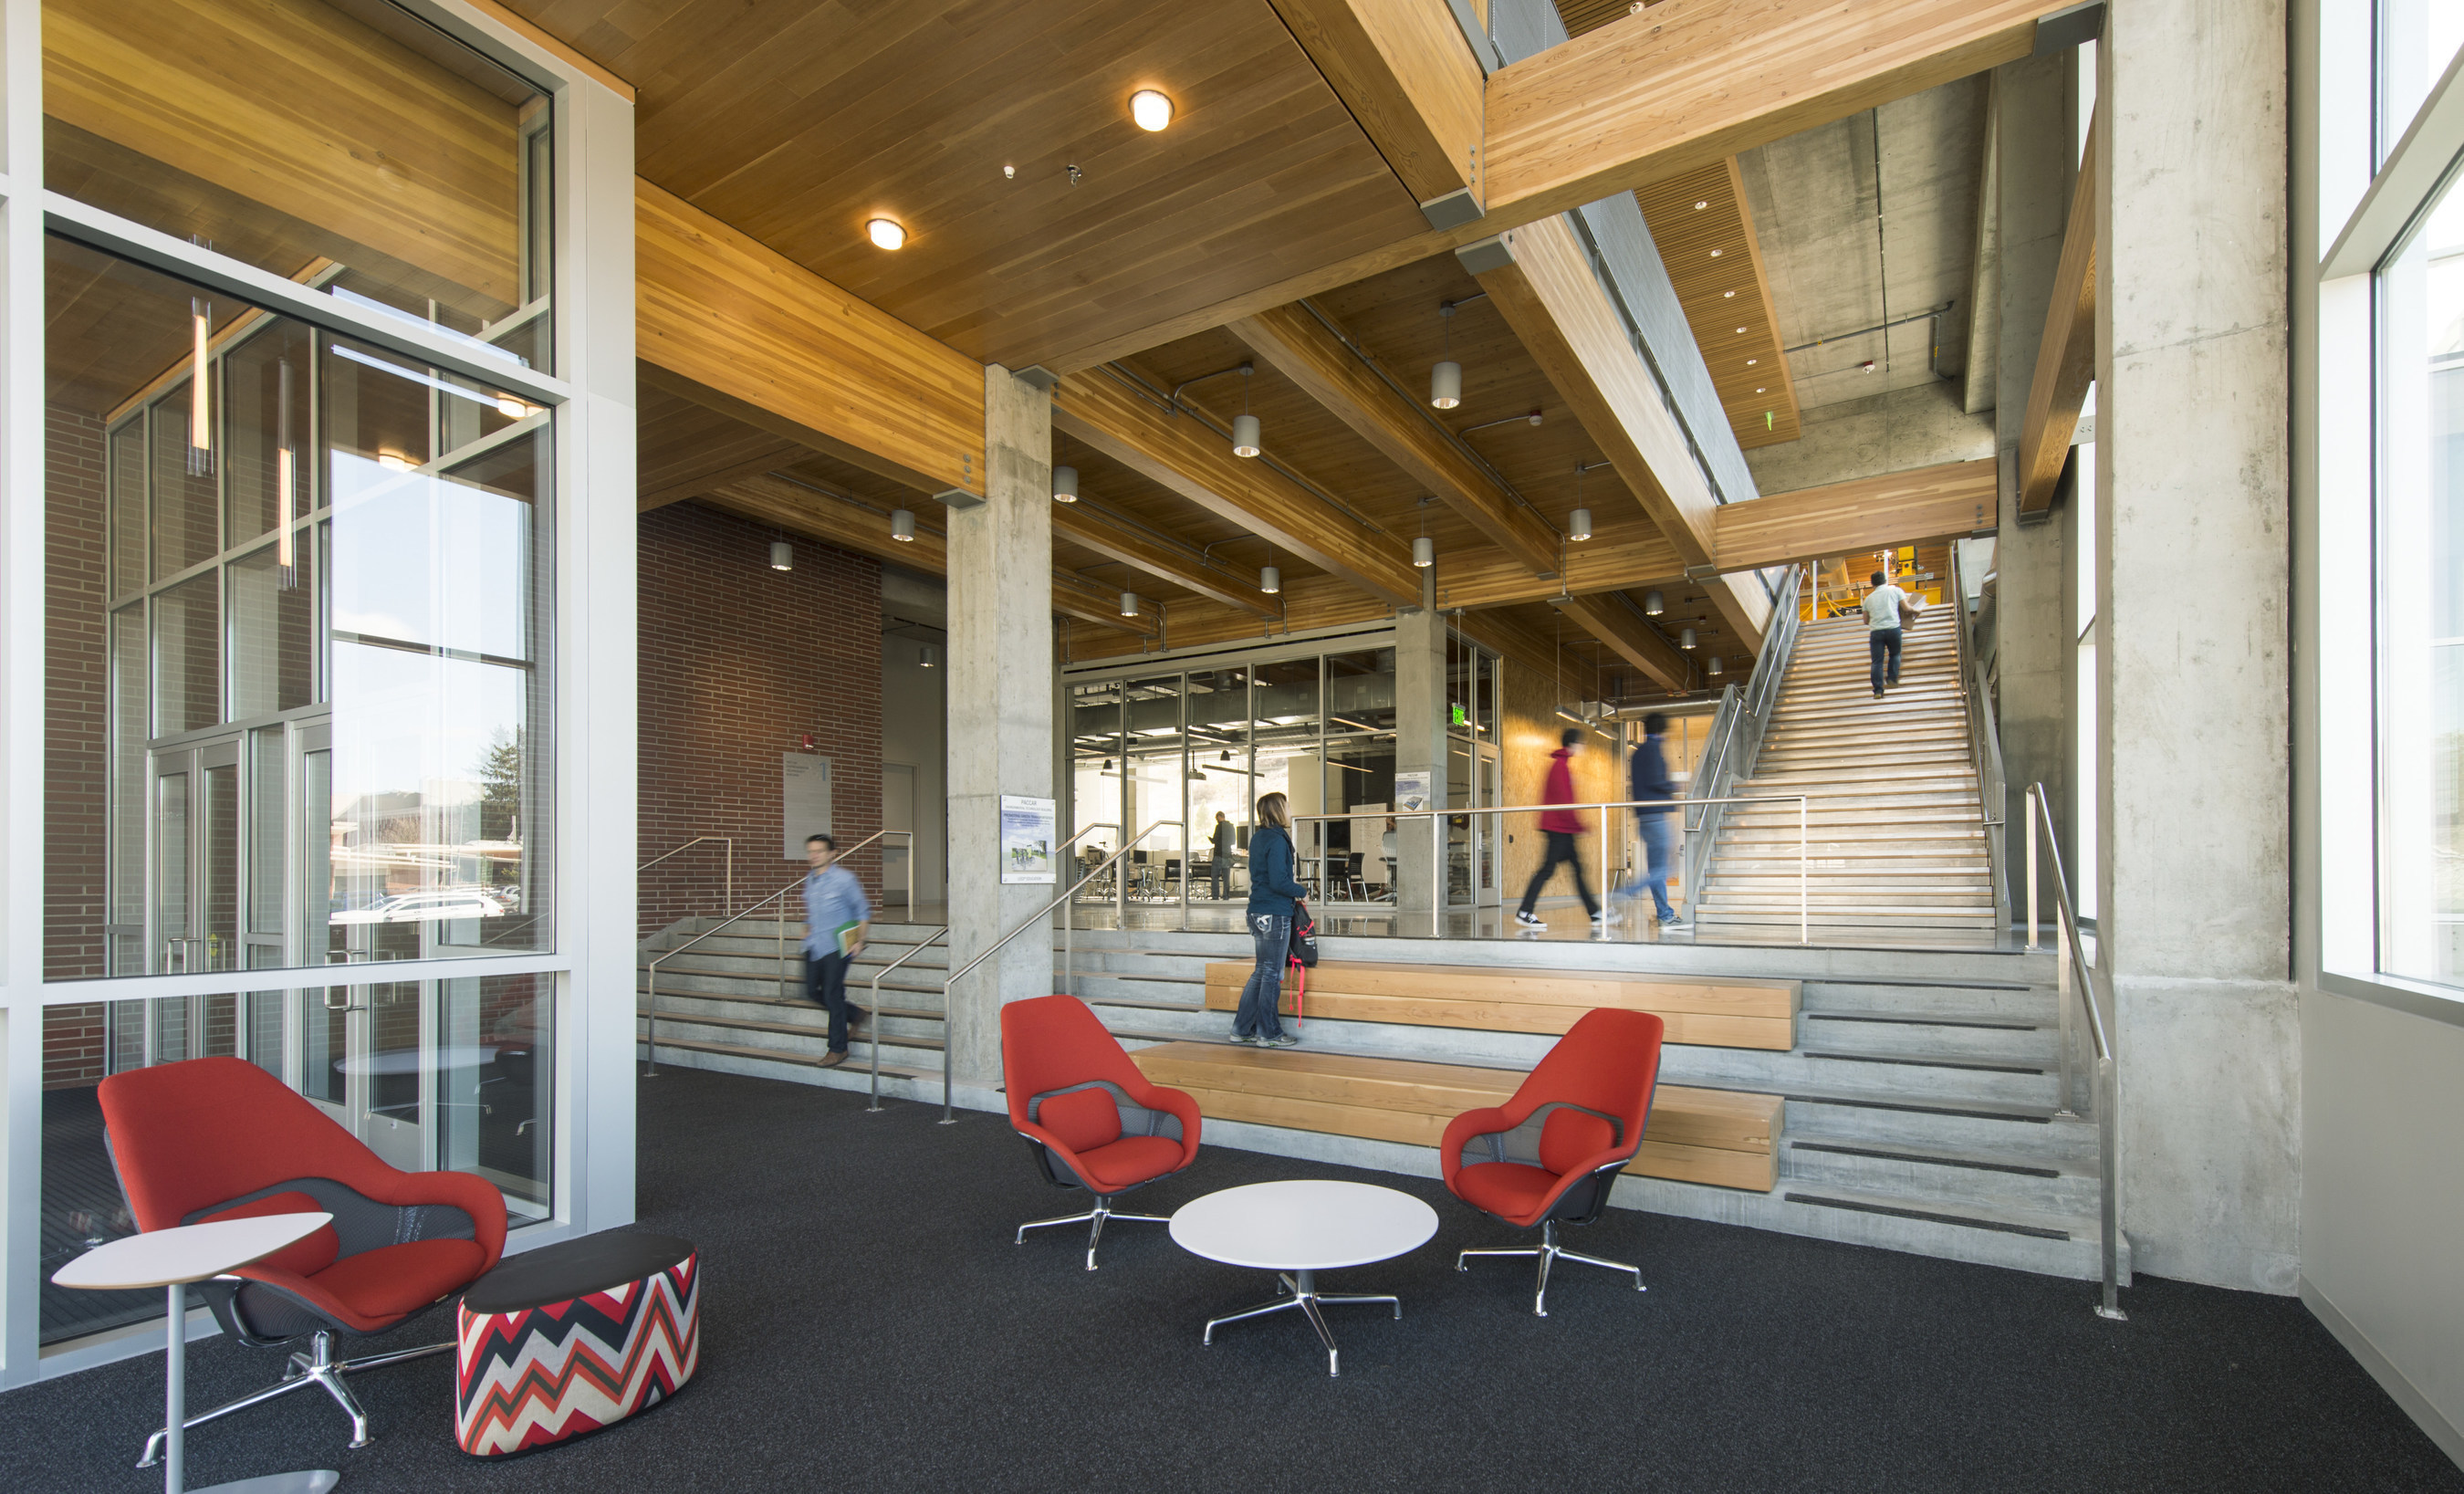 Interior view of PACCAR Environmental Technology Building at Washington State University by LMN Architects. Image courtesy of LMN.